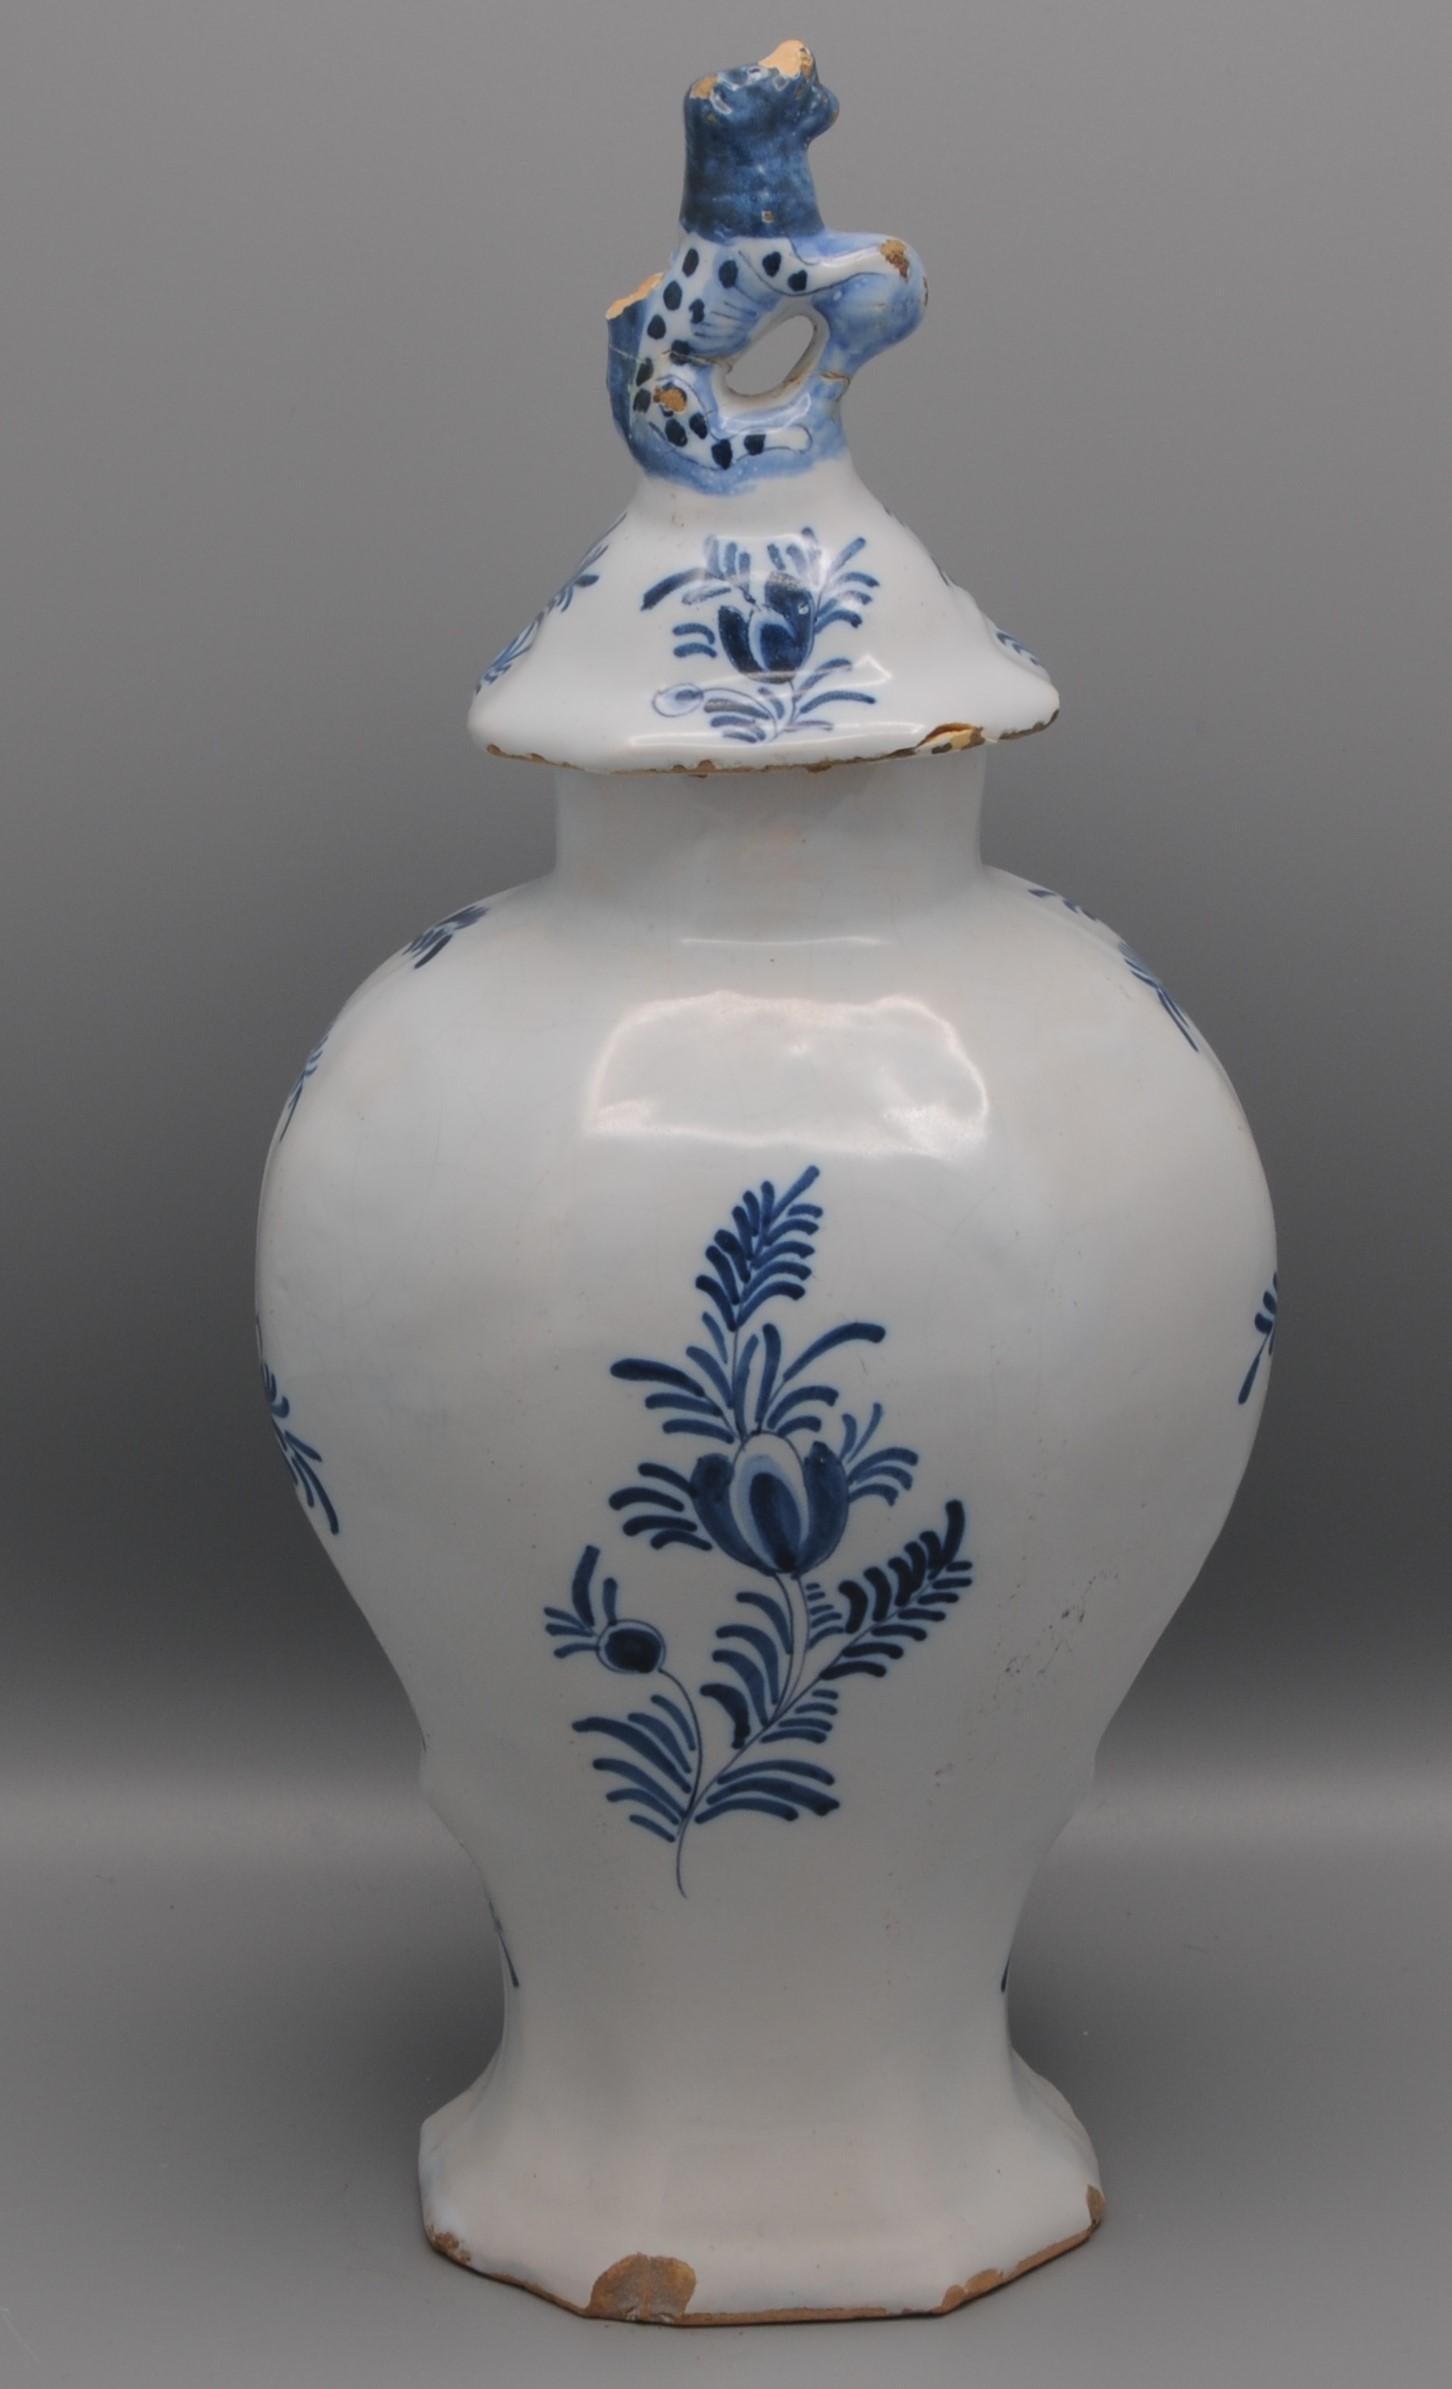 Late 18th century Blue Delftware lidded vase with central decoration of a flower bouquet in a cartouche. 
Finial with foo dog alike creature. 

Marked on underside: LPK for 